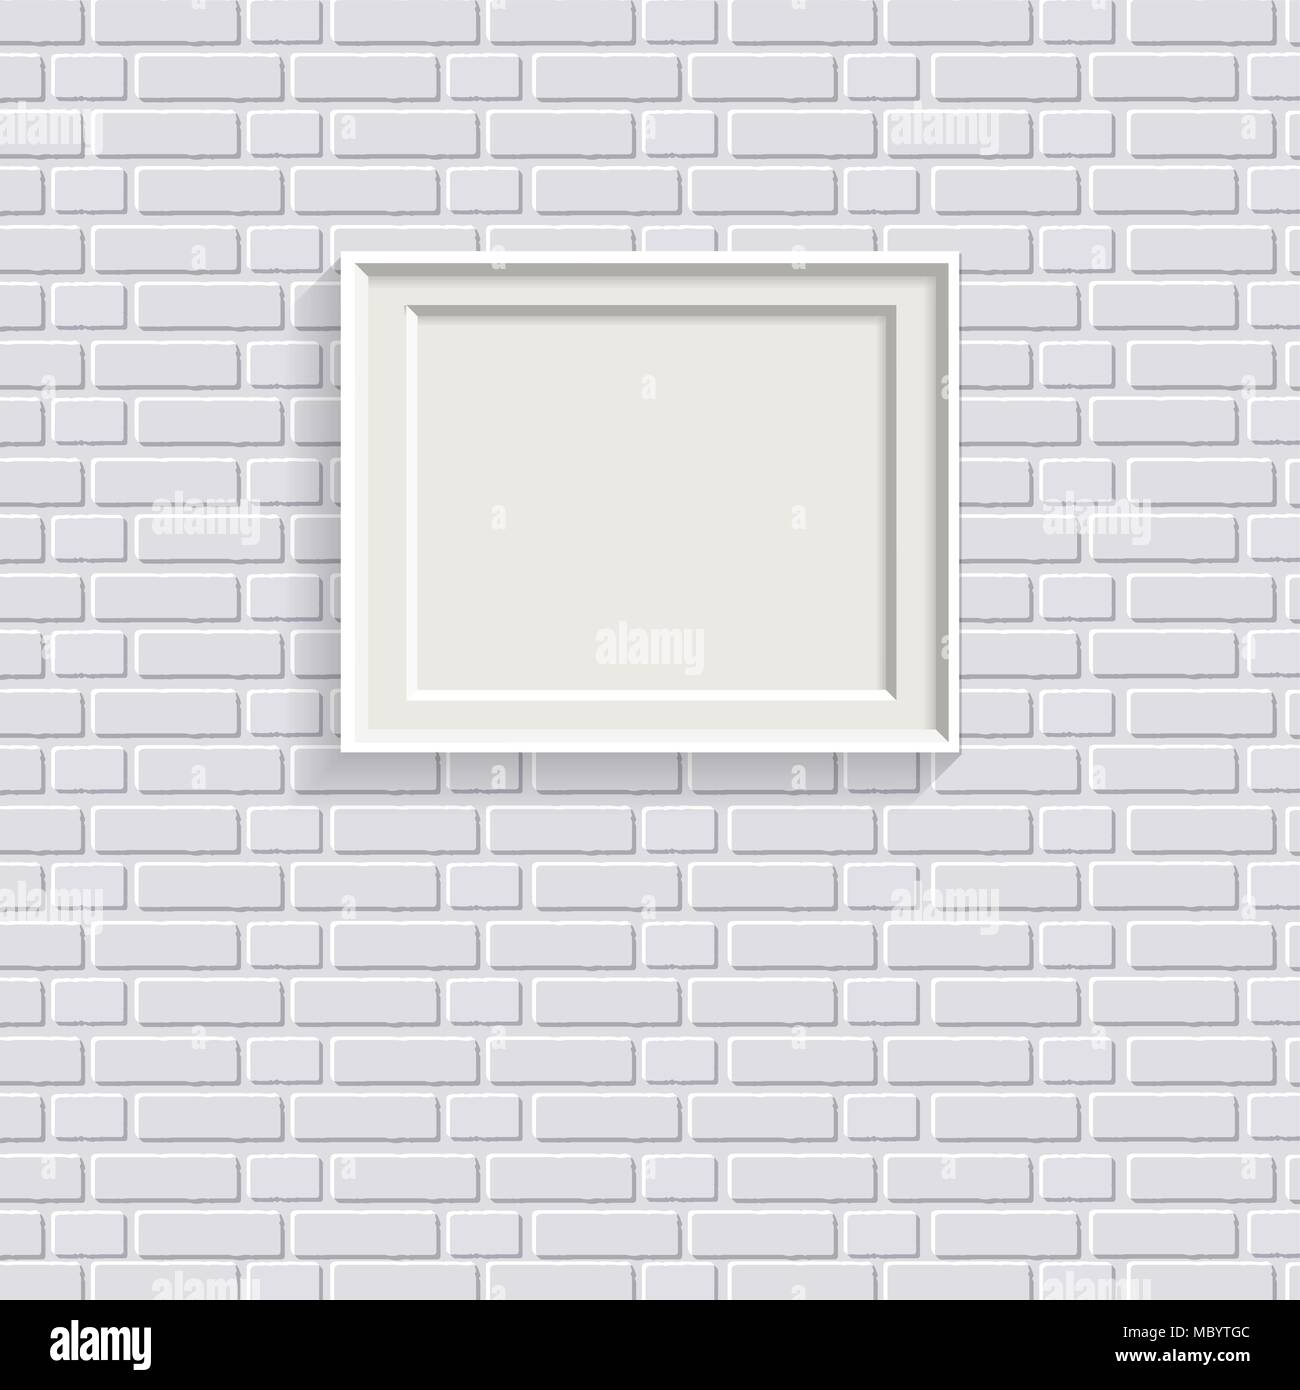 White realistic picture frame on white painted brick wall seamless pattern vector background. Modern photo frame and text to your design projects. Lay Stock Vector